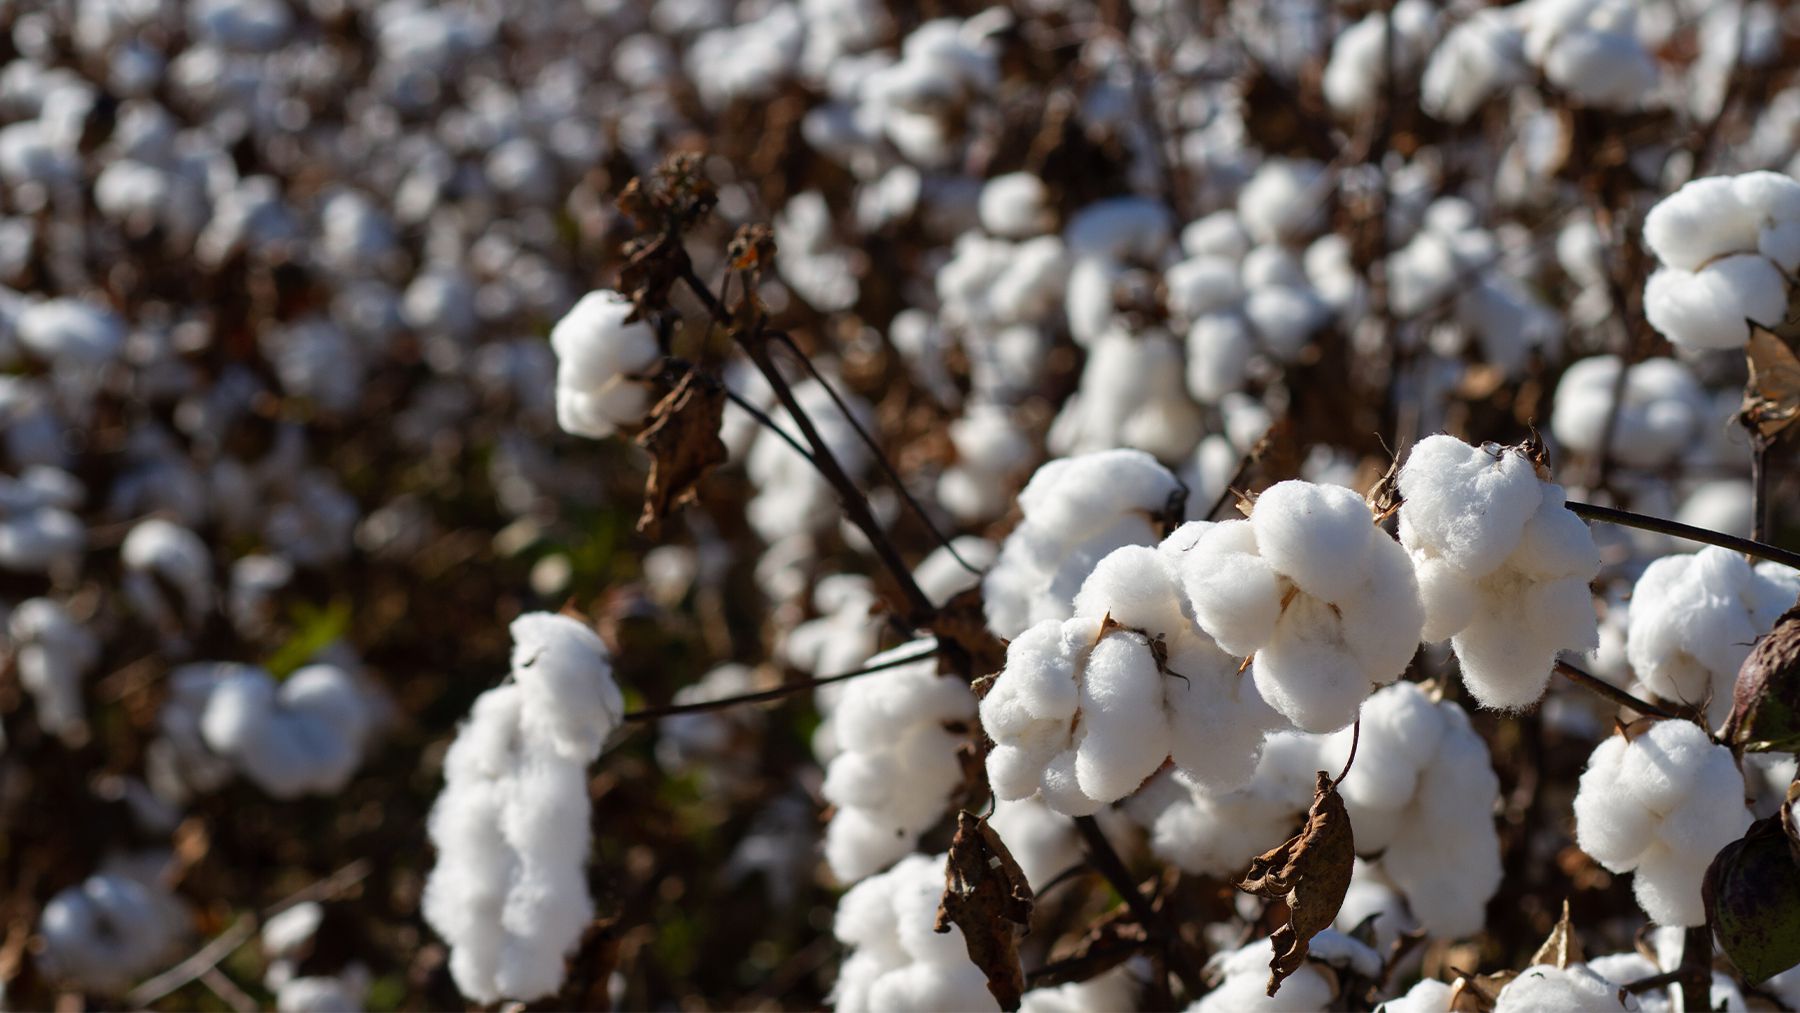 Armani Tests Sustainable Cotton Production in Italy